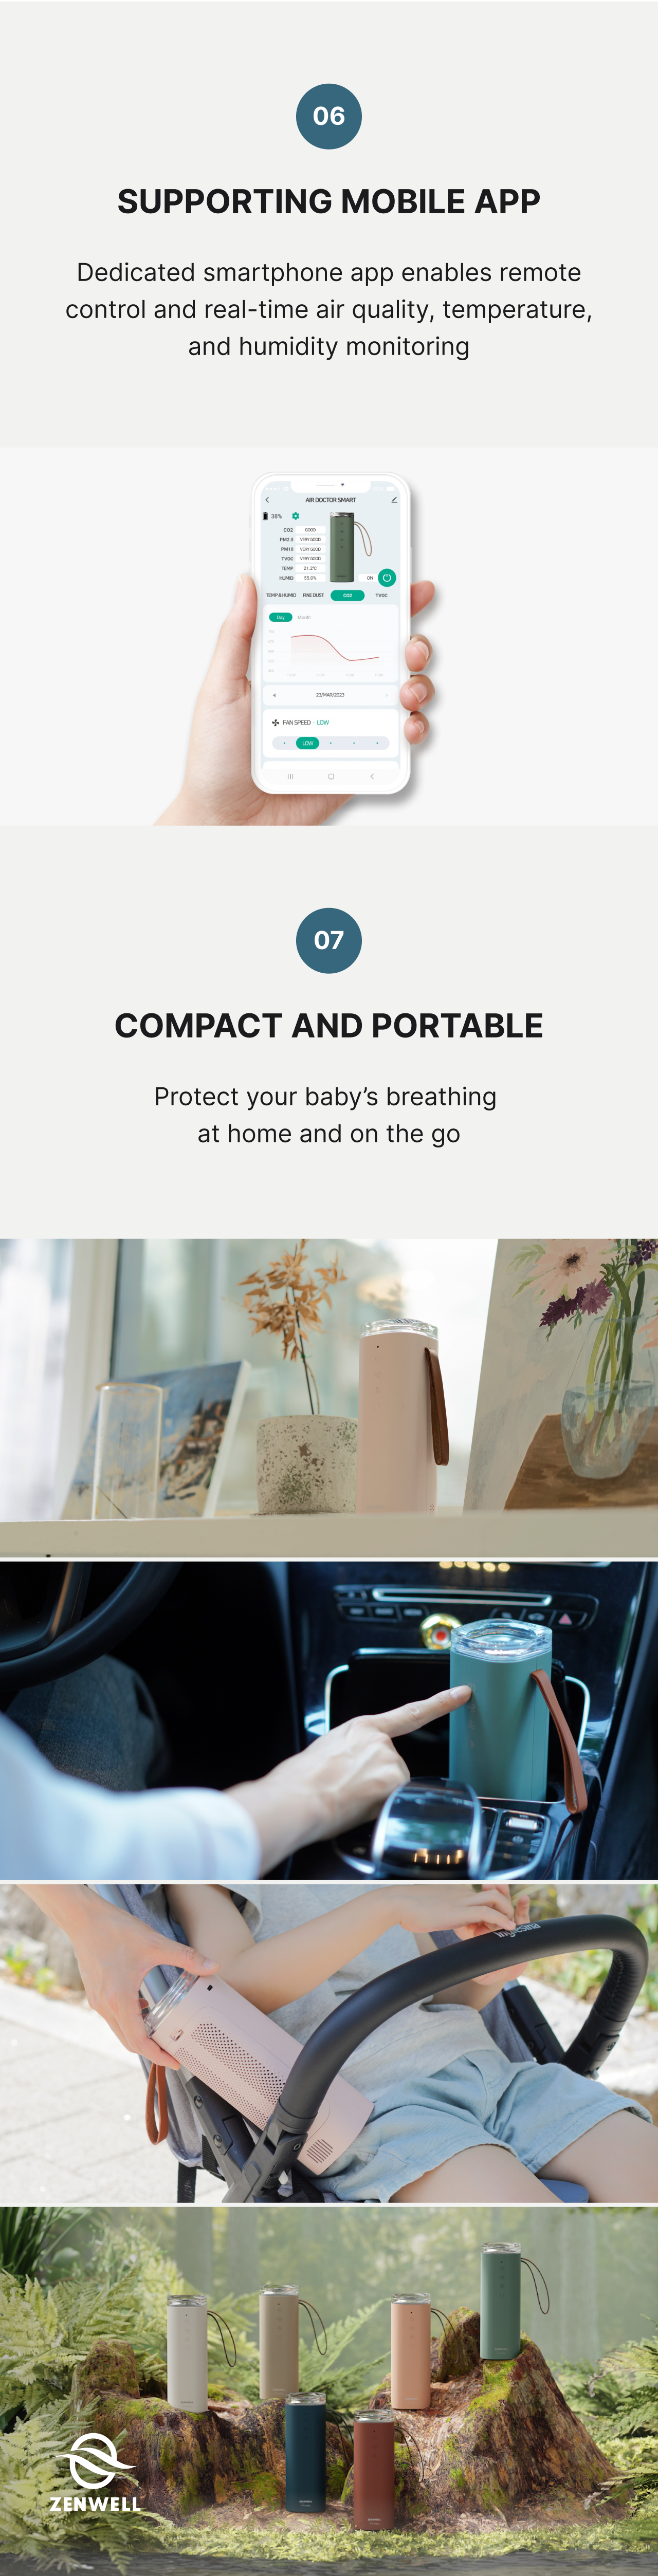 Baby Safe Air Doctor Smart product description image showing supporting mobile app with air quality insights and images showing how the unit is portable and can protect you and your child on the go